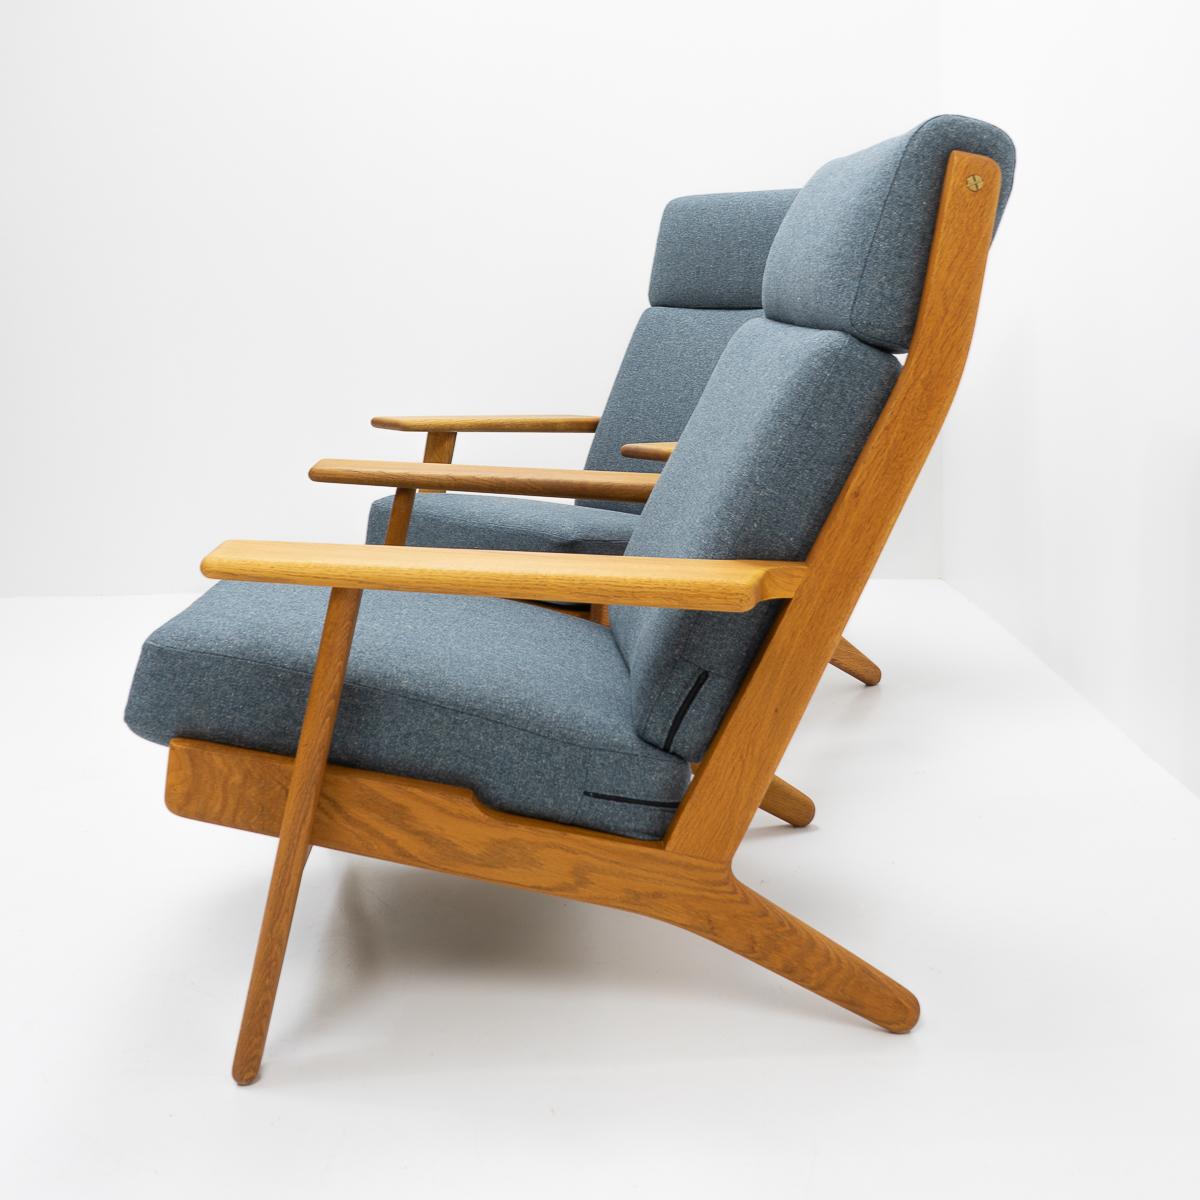 Mid-20th Century Danish Design Classic GE 290 Arm Chairs by Hans Wegner for Getama, 1960s For Sale